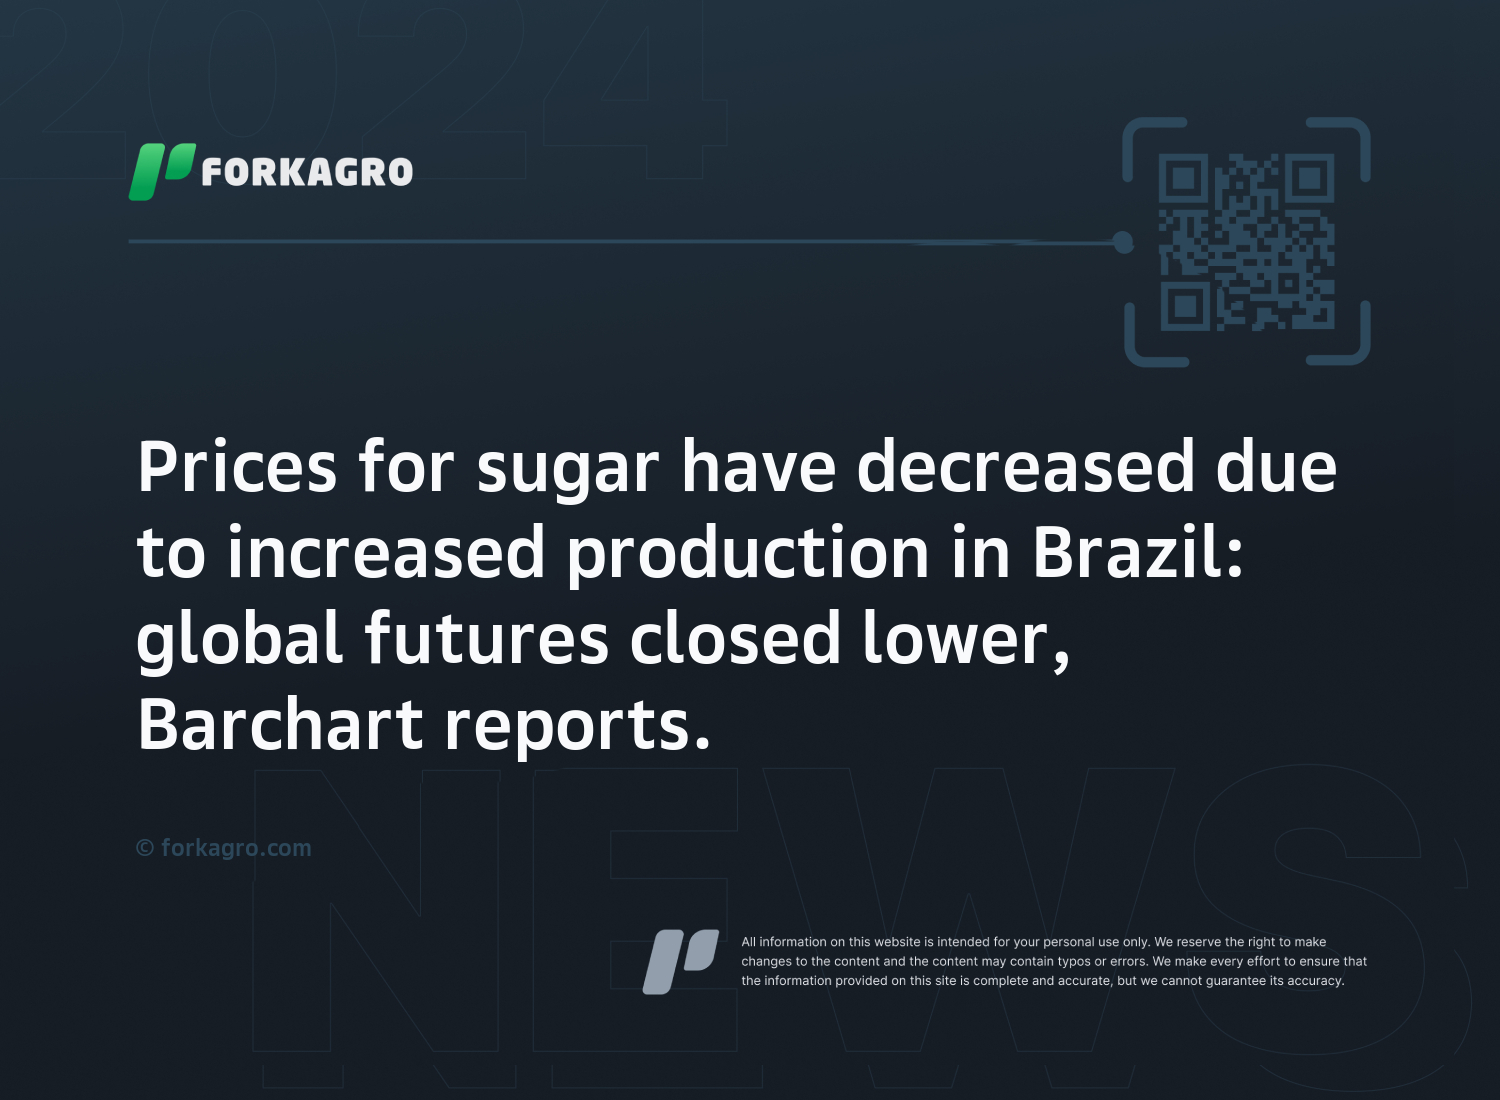 Prices for sugar have decreased due to increased production in Brazil: global futures closed lower, Barchart reports.